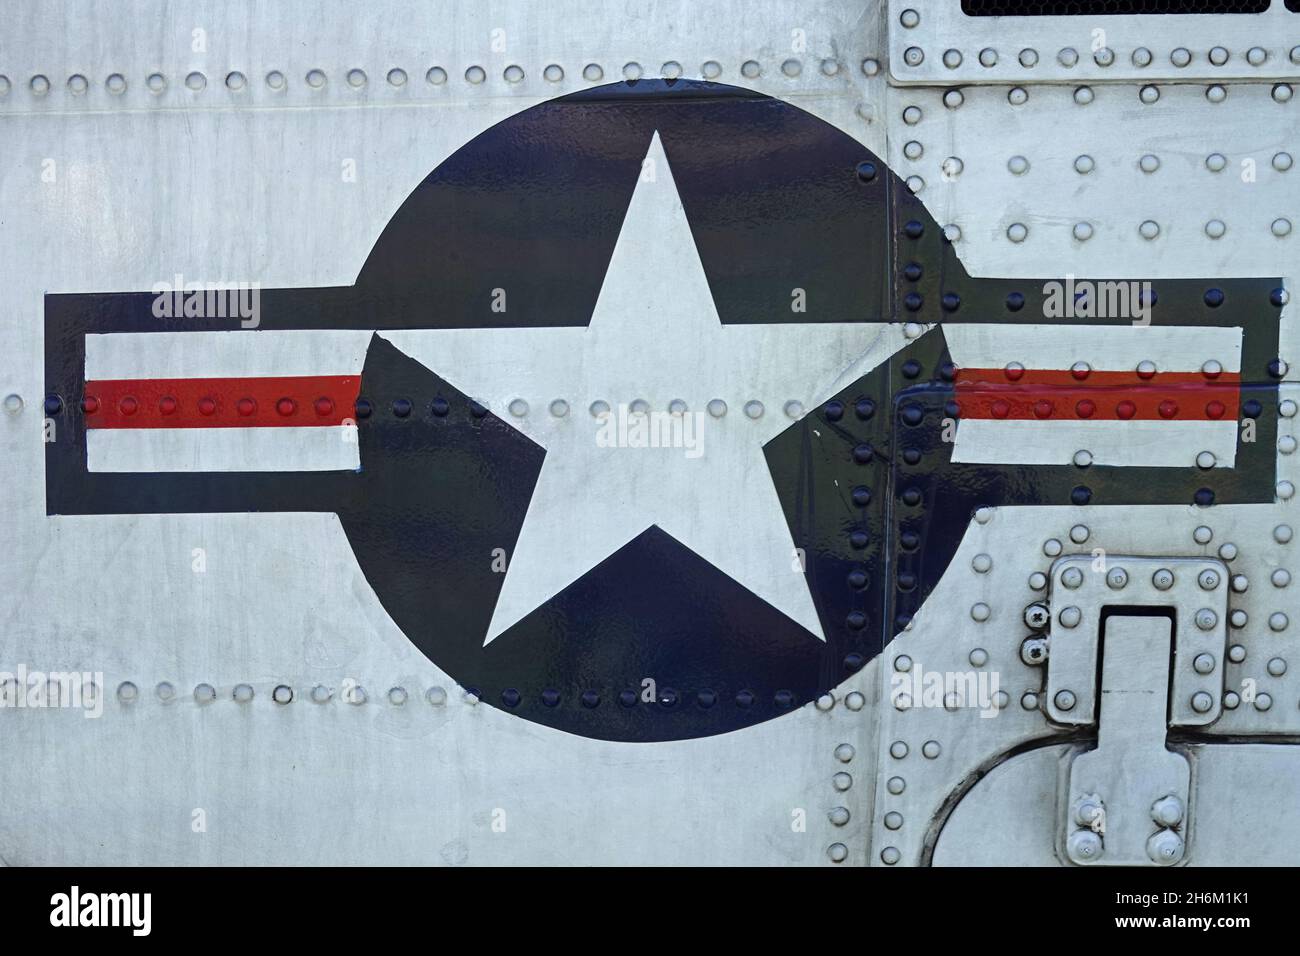 A red, white, and blue roundel logo signifying United States of America military aircraft is shown painted on a helicopter up close. This insignia ver Stock Photo